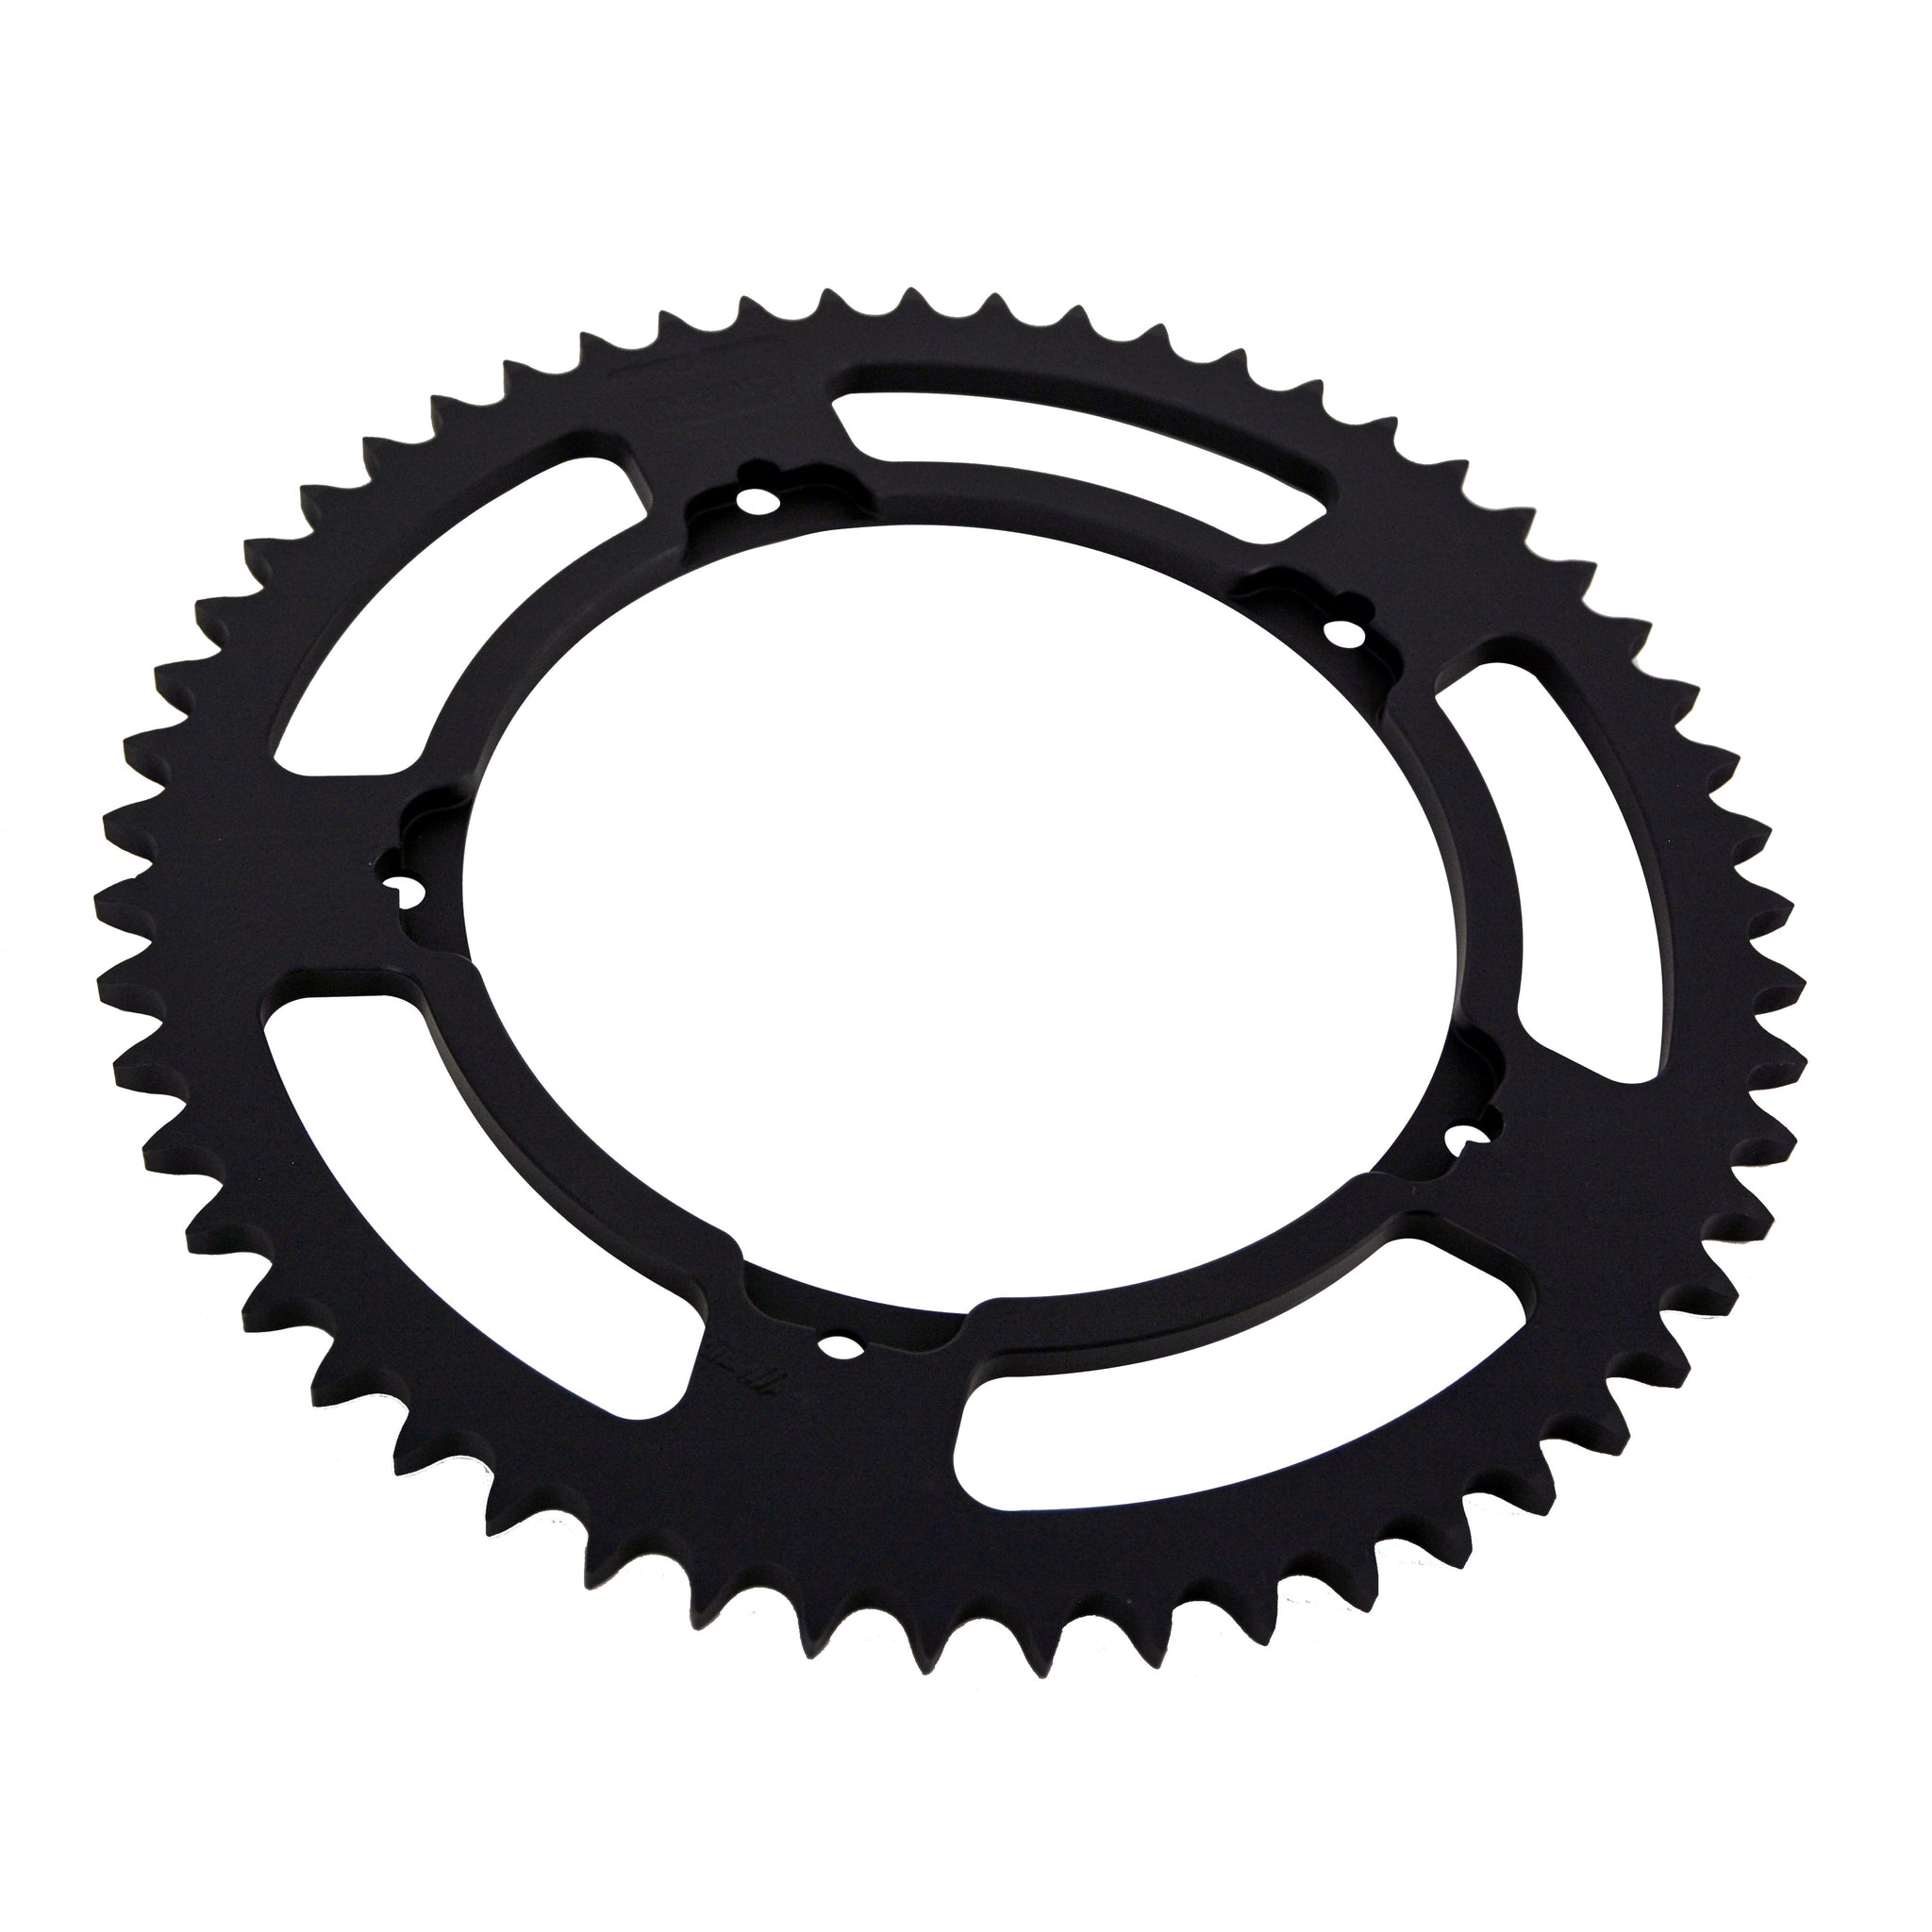 TARAZON Cush Drive 530 Chain Conversion Kit Transmission Sprocket for  Harley Davidson 2009-Up Touring Twin Cam and M8, such as Electra Glide/Road